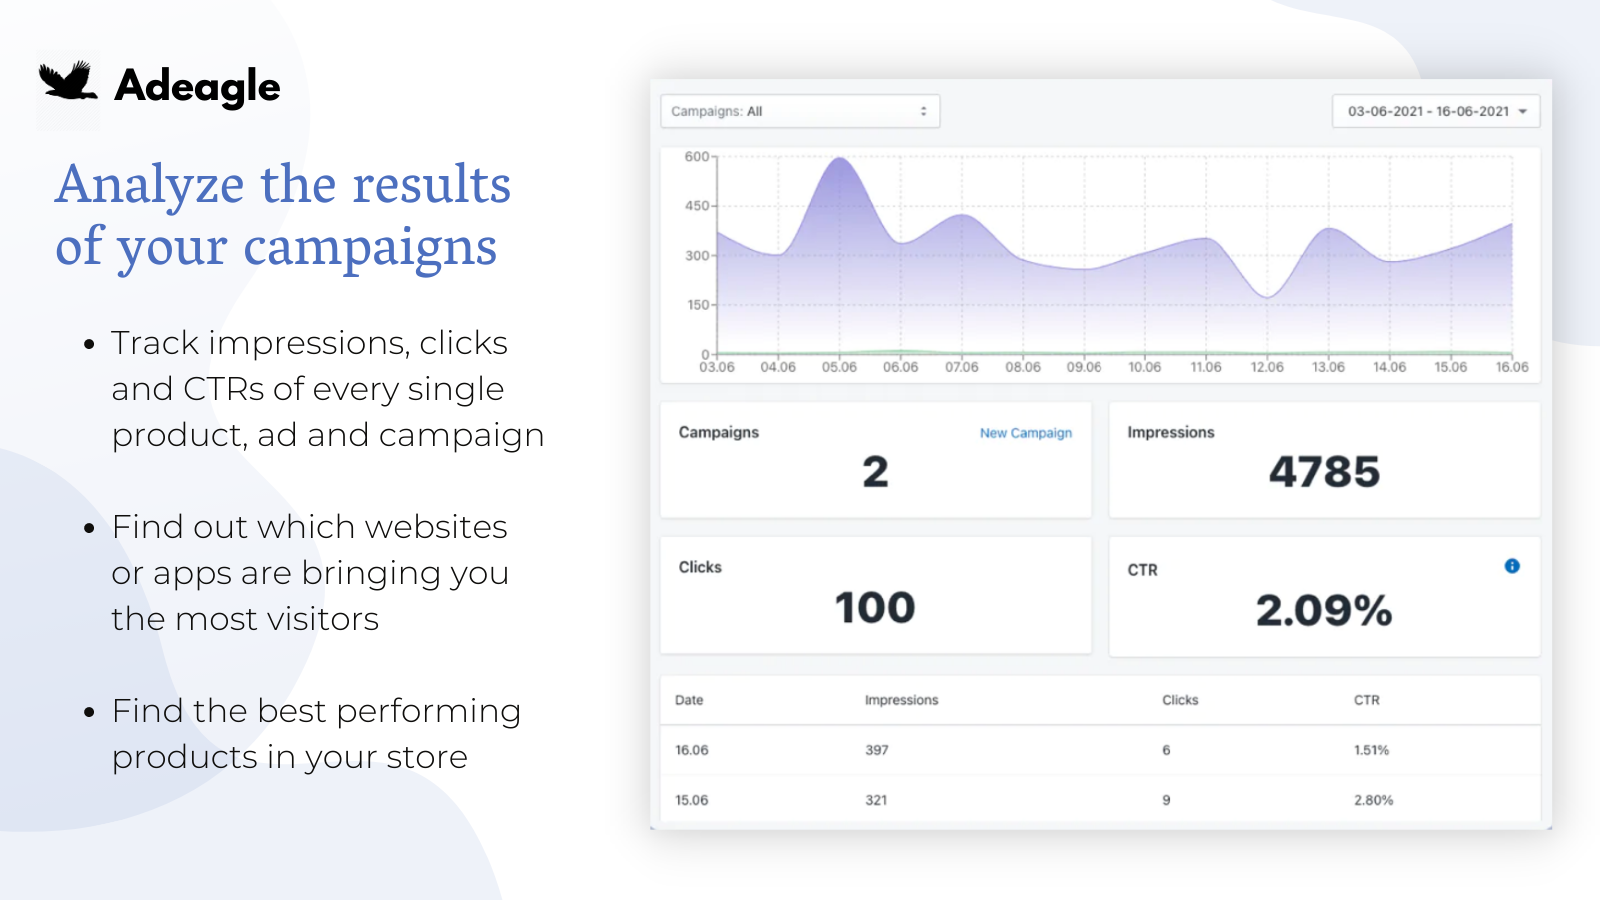 Analyze the results of your campaigns